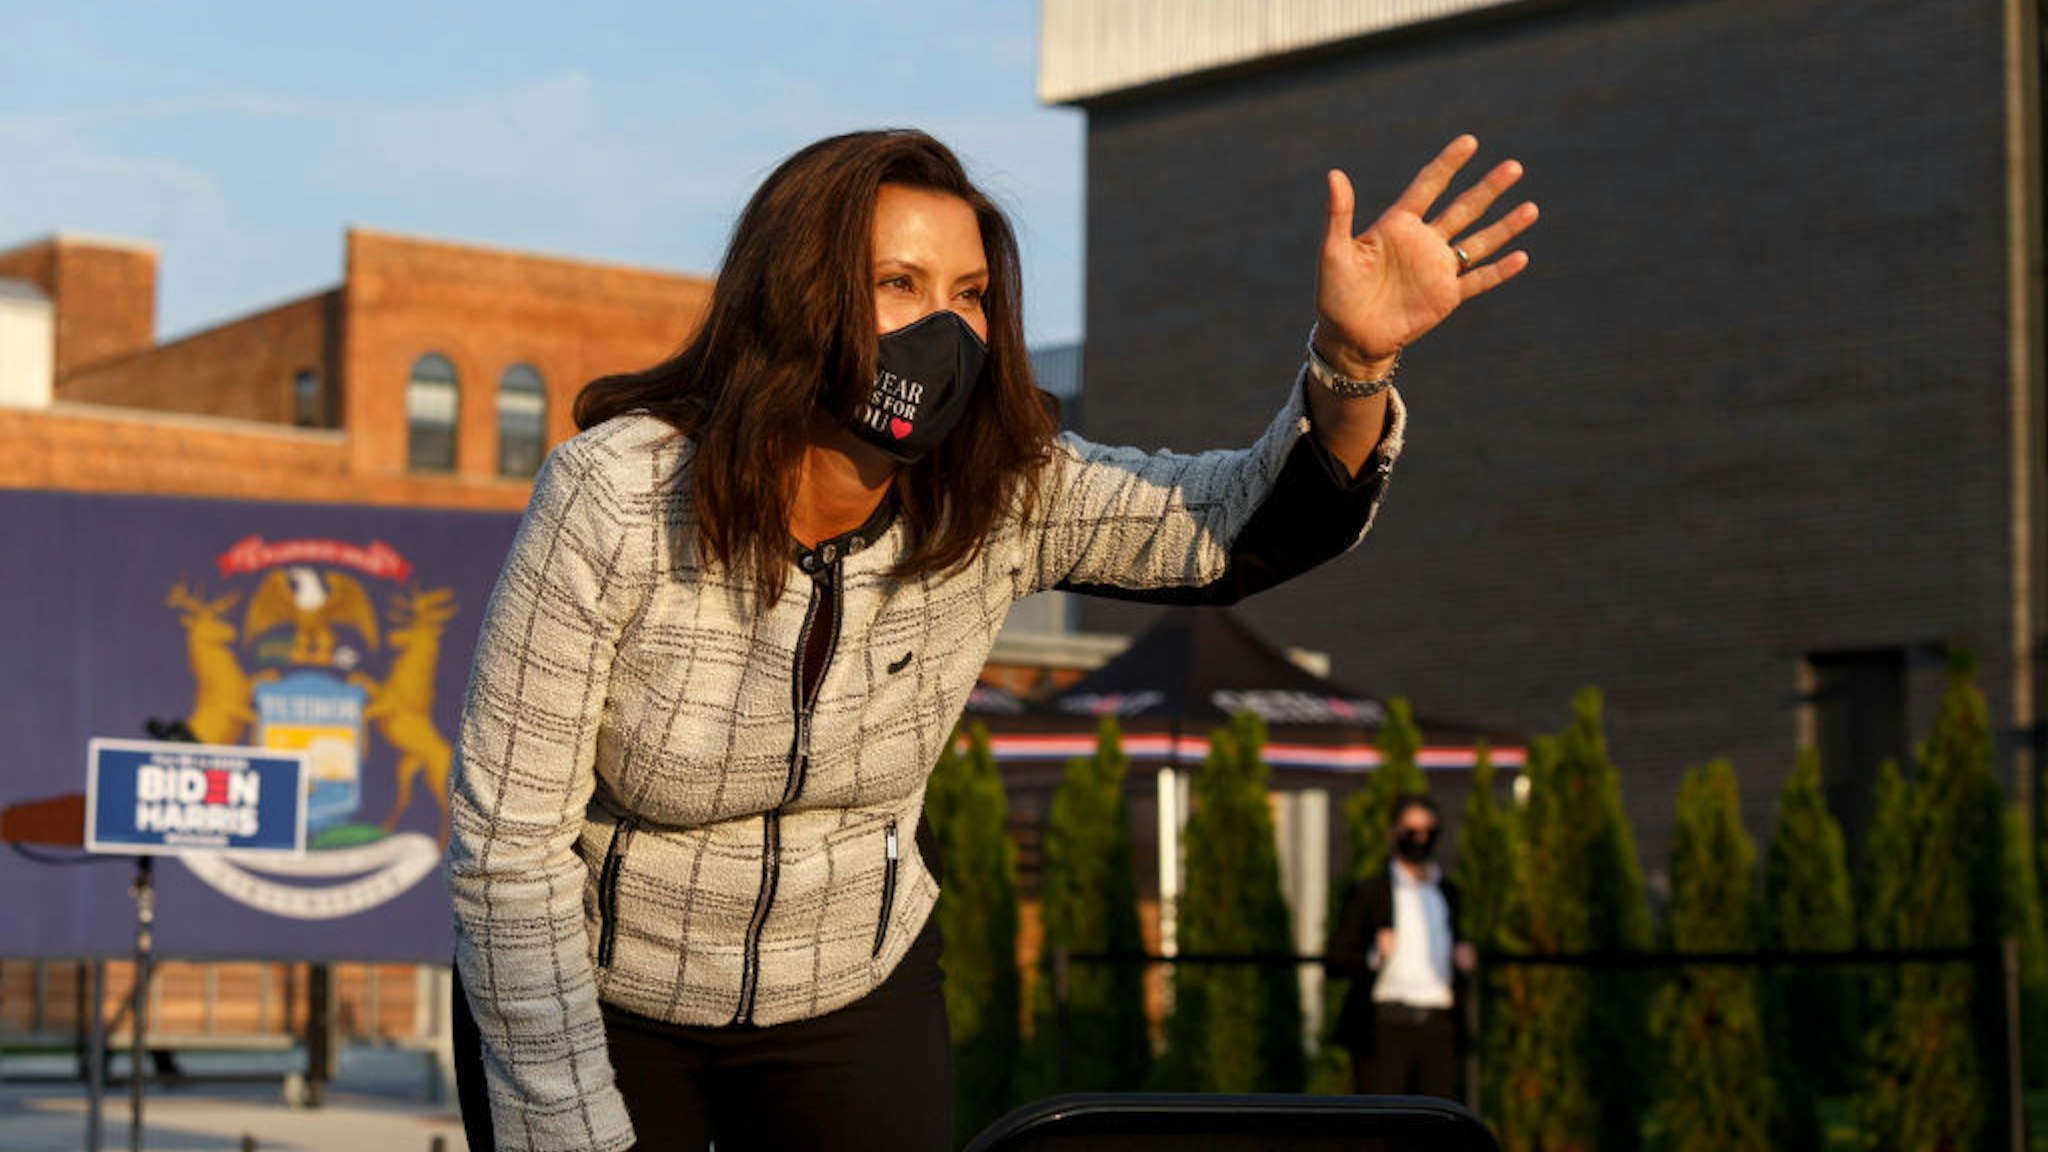 DETROIT, MI - SEPTEMBER 22: Governor Gretchen Whitmer waves to the crowd during a voter mobilization event on September 22, 2020 in Detroit, Michigan. With election day less than a month and a half away, Harris visits different cities in the swing state of Michigan. (Photo by Elaine Cromie/Getty Images)